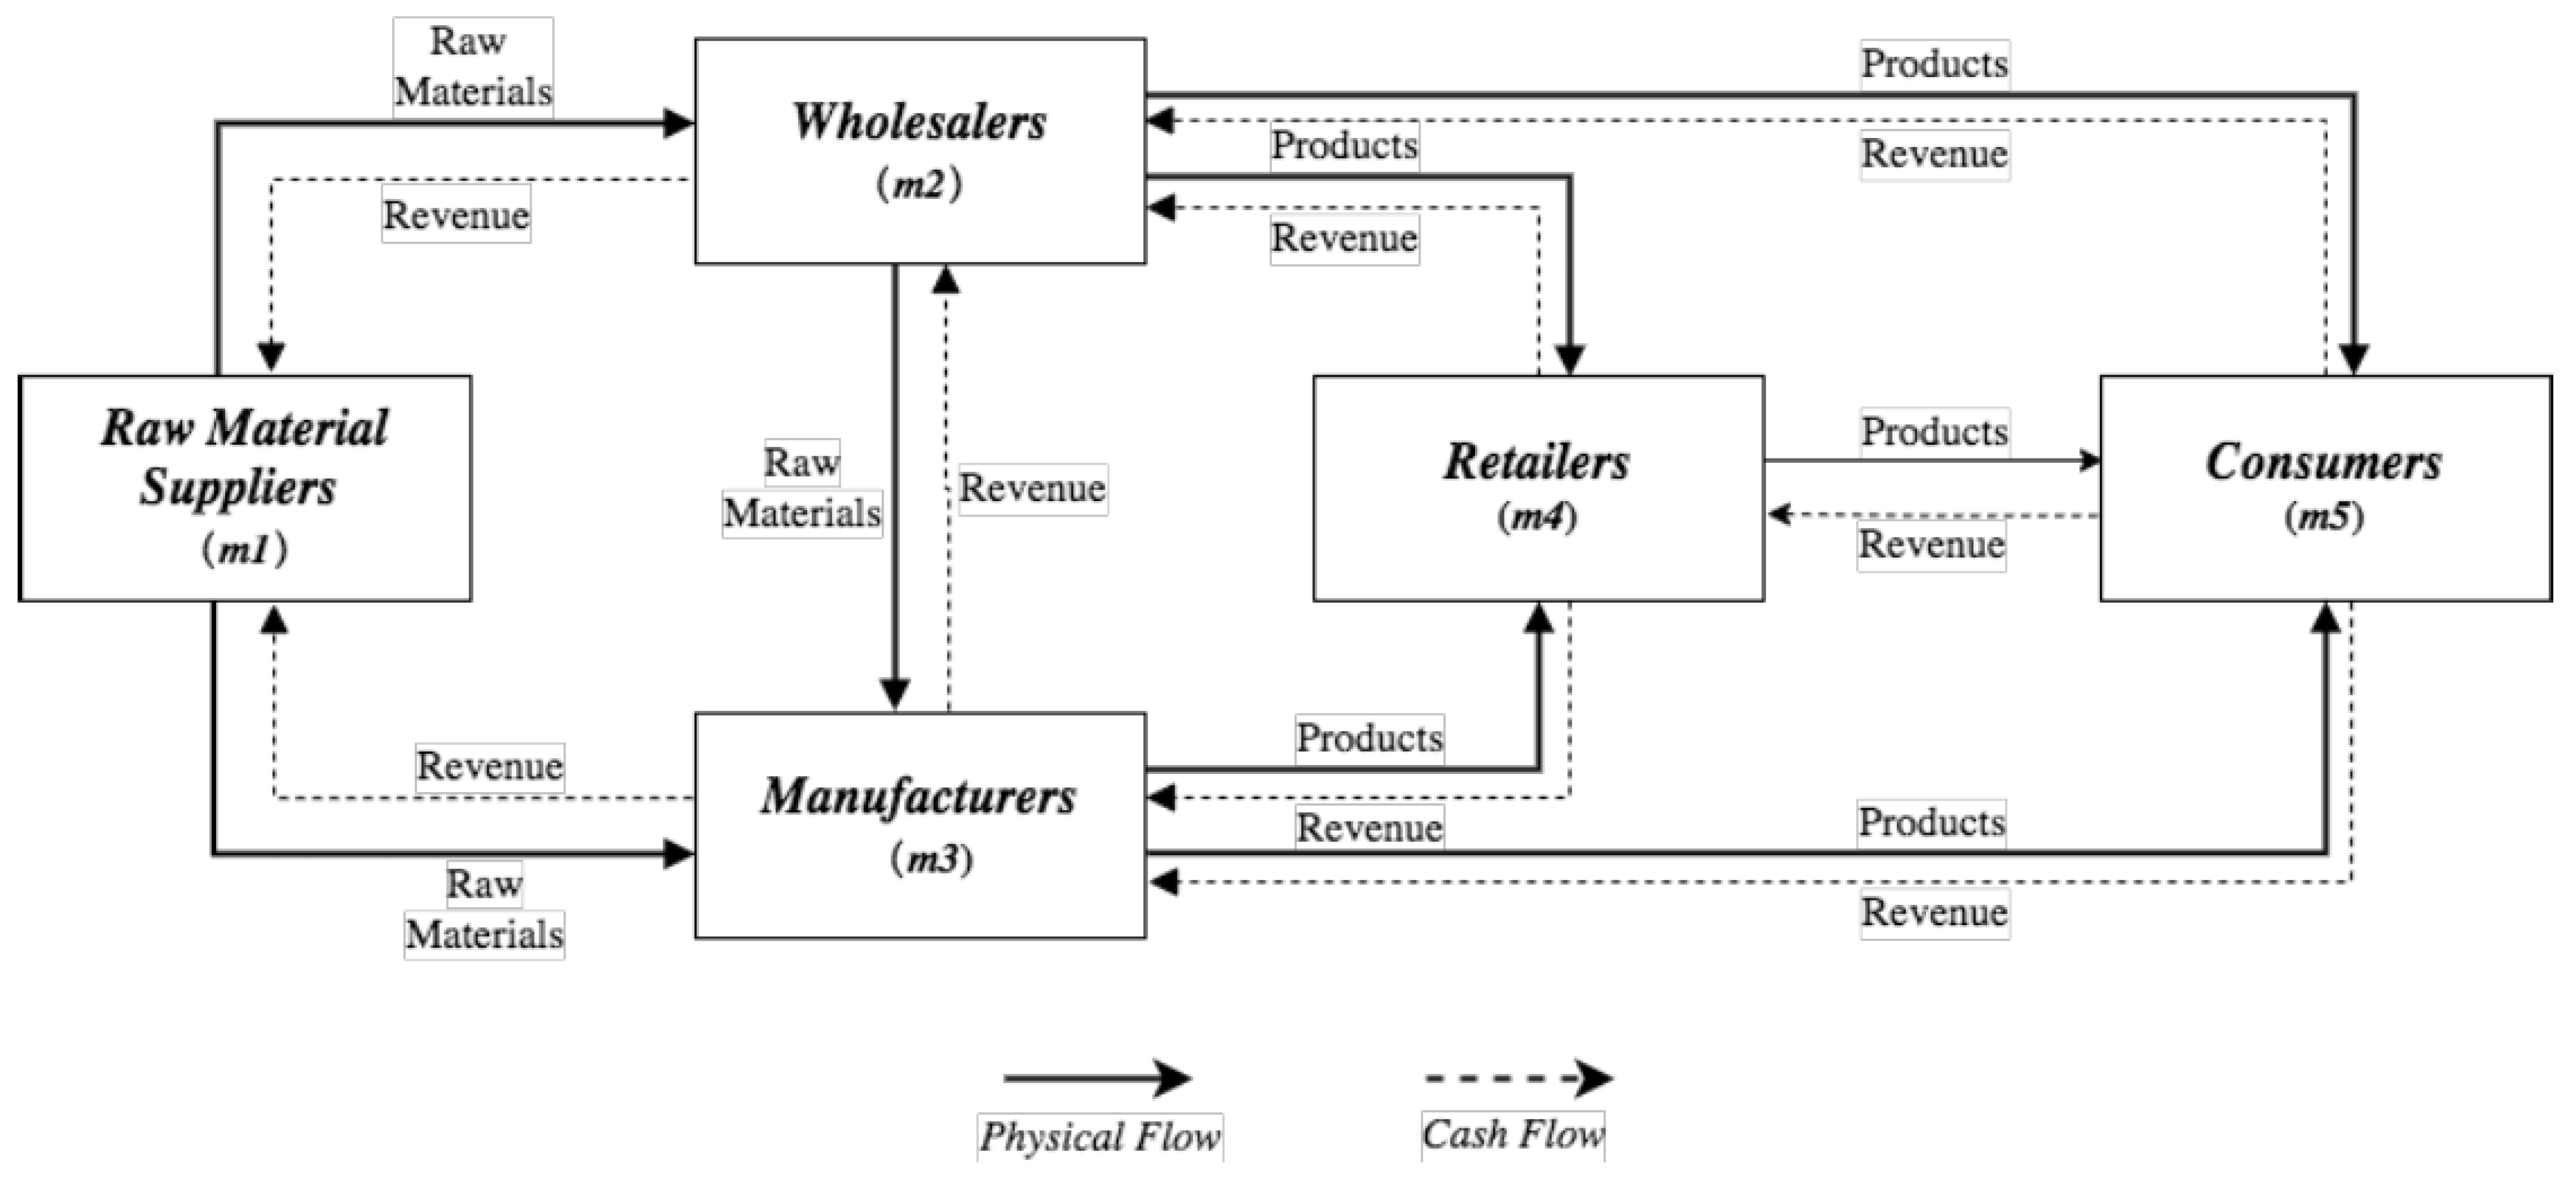 Material flow analysis of commercial fishing gears in Taiwan - ScienceDirect